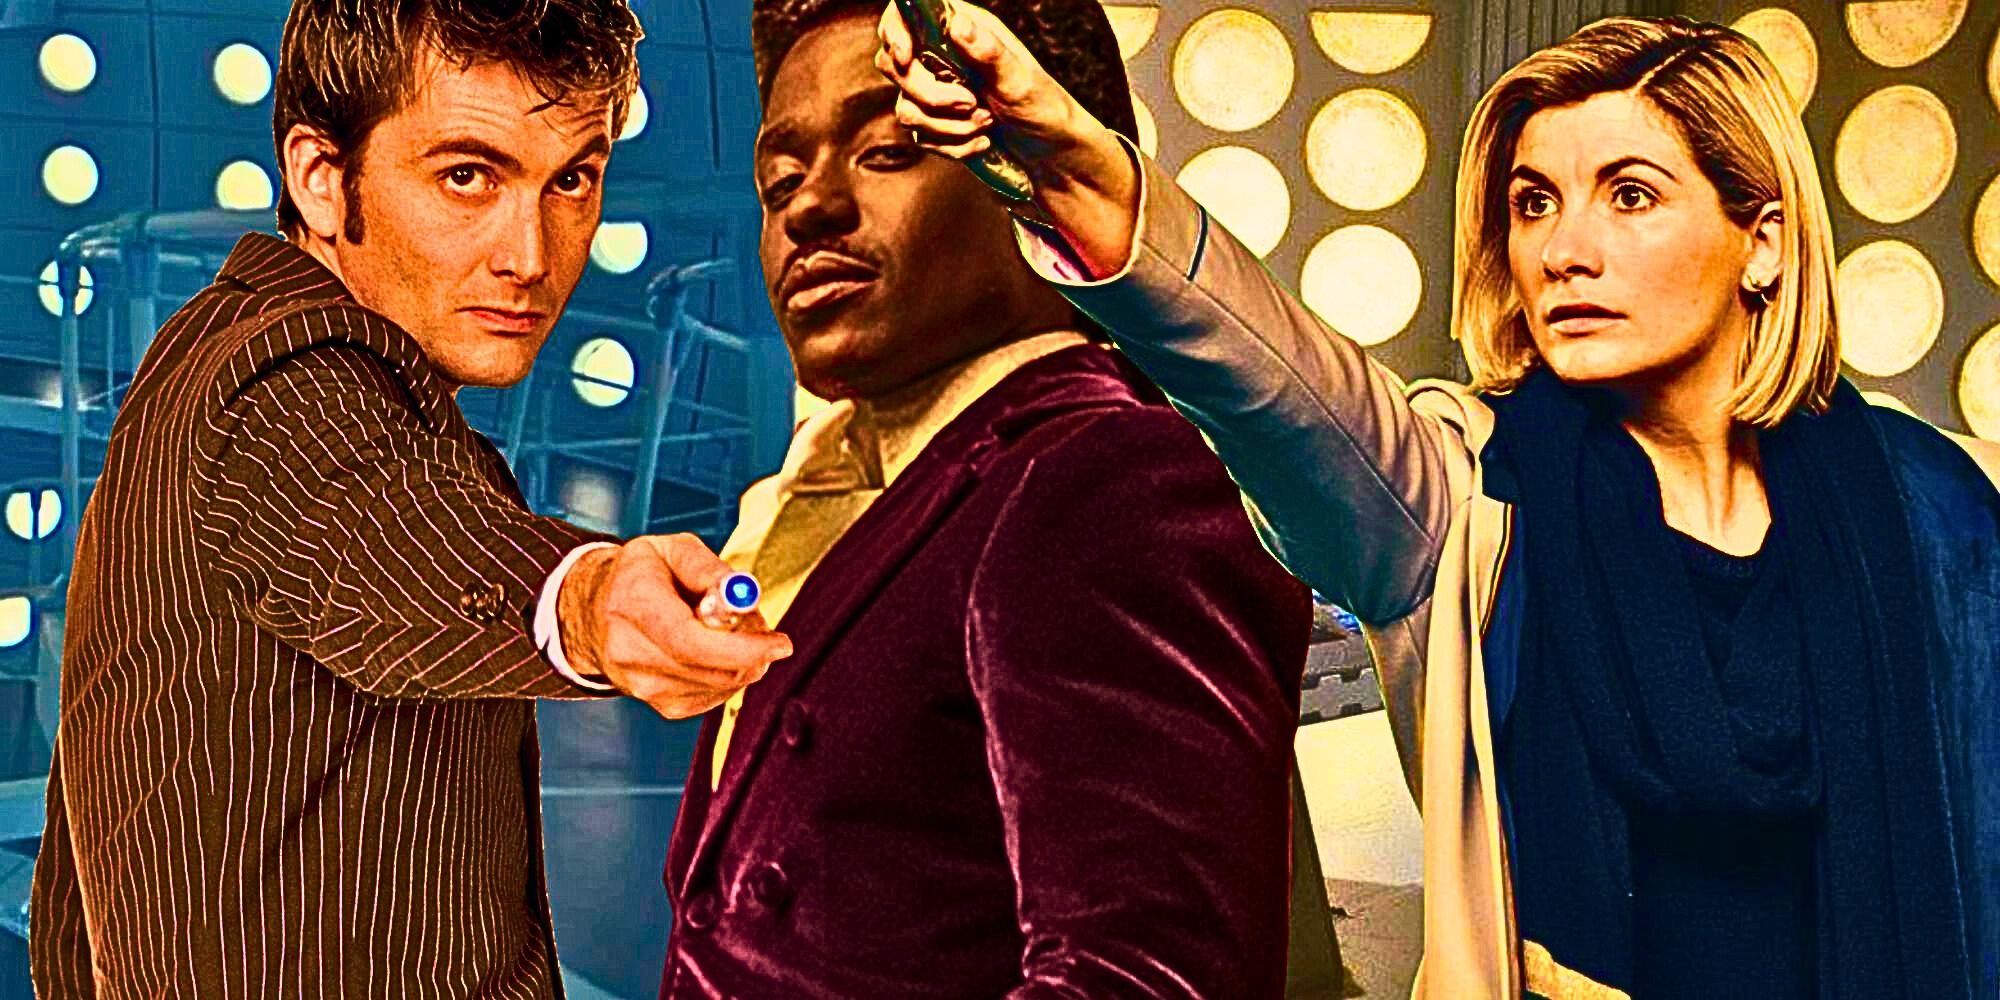 A custom Doctor Who image of David Tennant's Tenth Doctor, Ncuti Gatwa's Fifteenth Doctor, and Jodie Whittaker's Thirteenth Doctor.